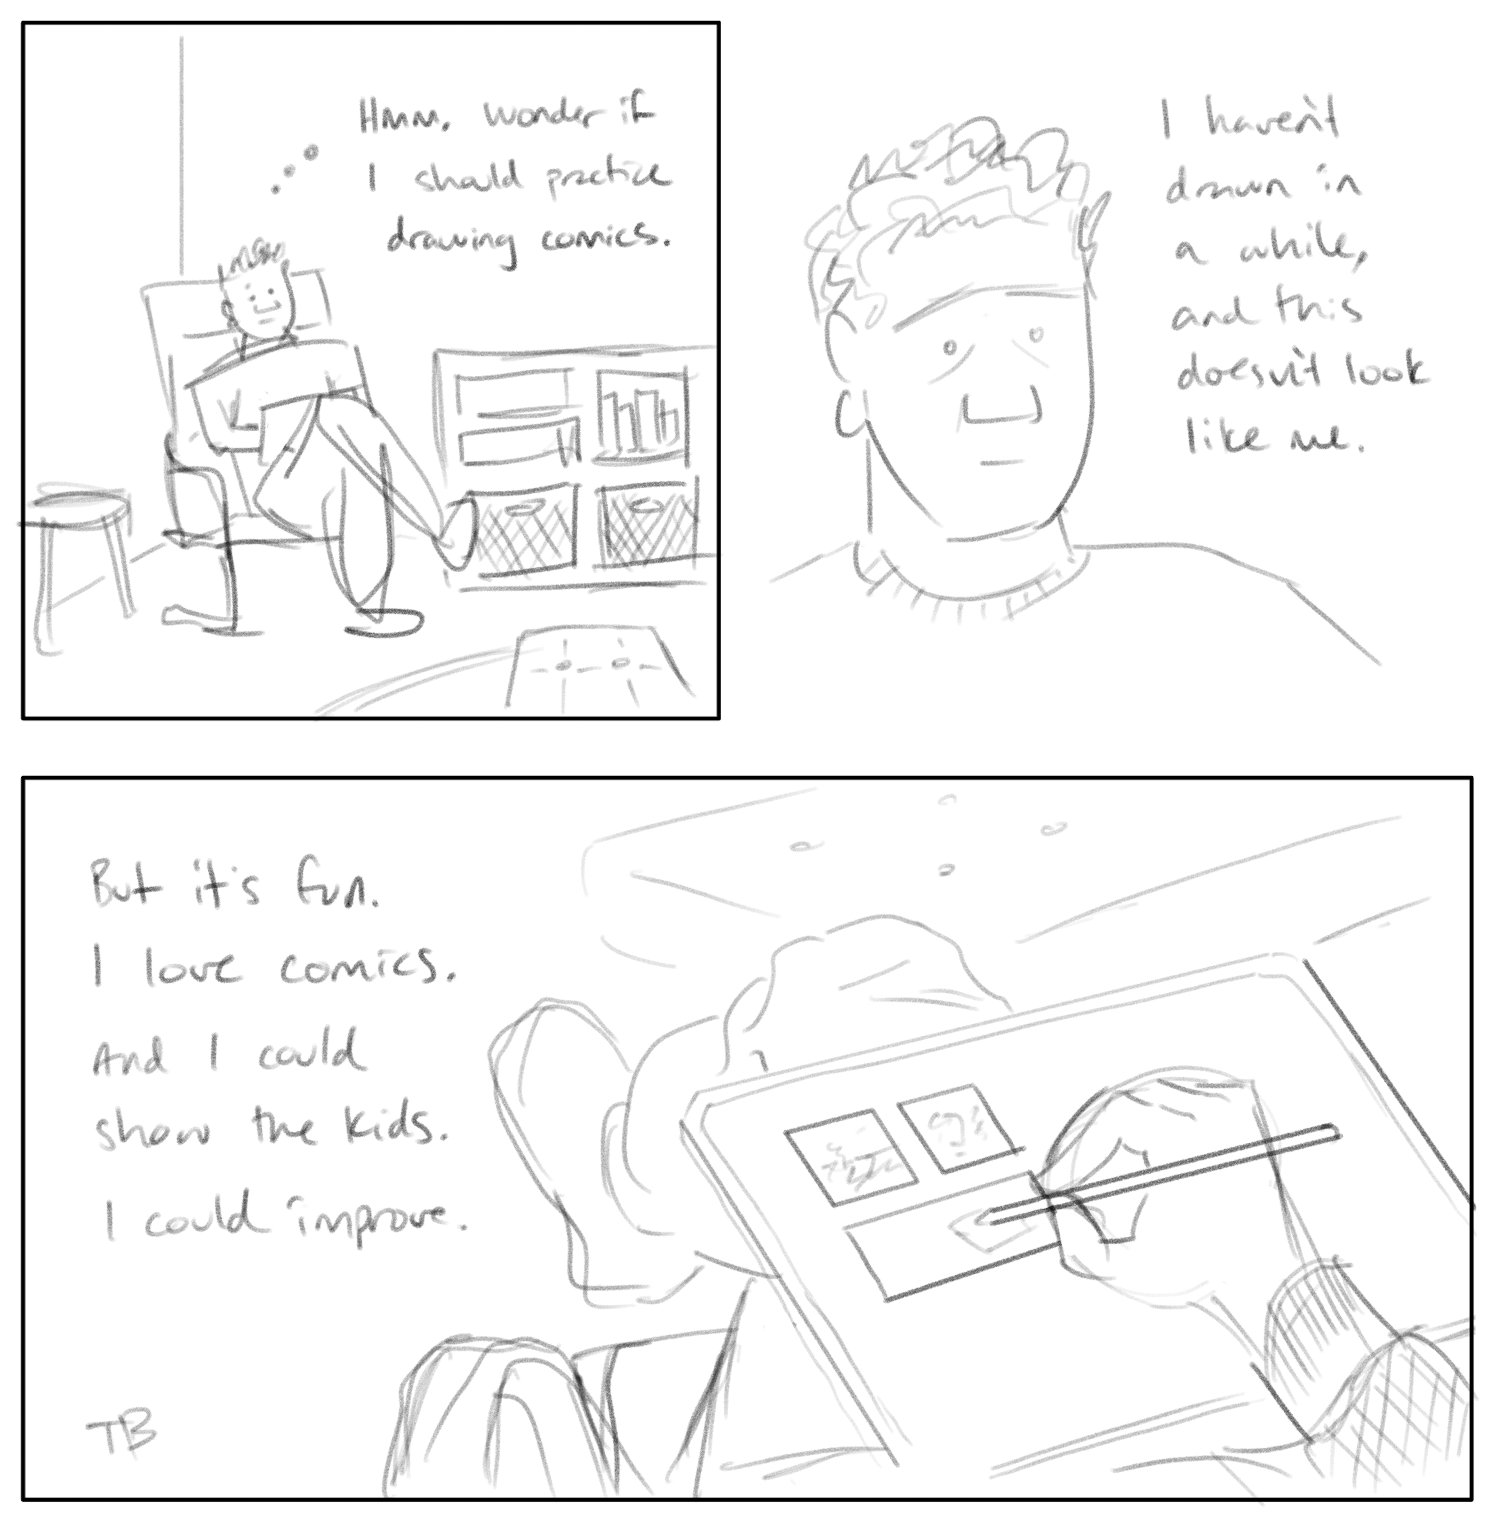 Three-panel comic in a sketchy pencil style. | Tim sits in a chair in his living room, legs crossed, iPad on lap. He thinks, “Hmm. Wonder if I shold practice drawing comics.” | Next a closeup of Tim's head. He thinks, “I haven’t drawn in a while, and this doesn’t look like me.” | Then a wide panel, first-person perspective showing Tim’s hand drawing this very comic on the iPad, with the iPad resting on his leg. He thinks, “But it’s fun. I love comics. And I could show the kids. I could improve.”